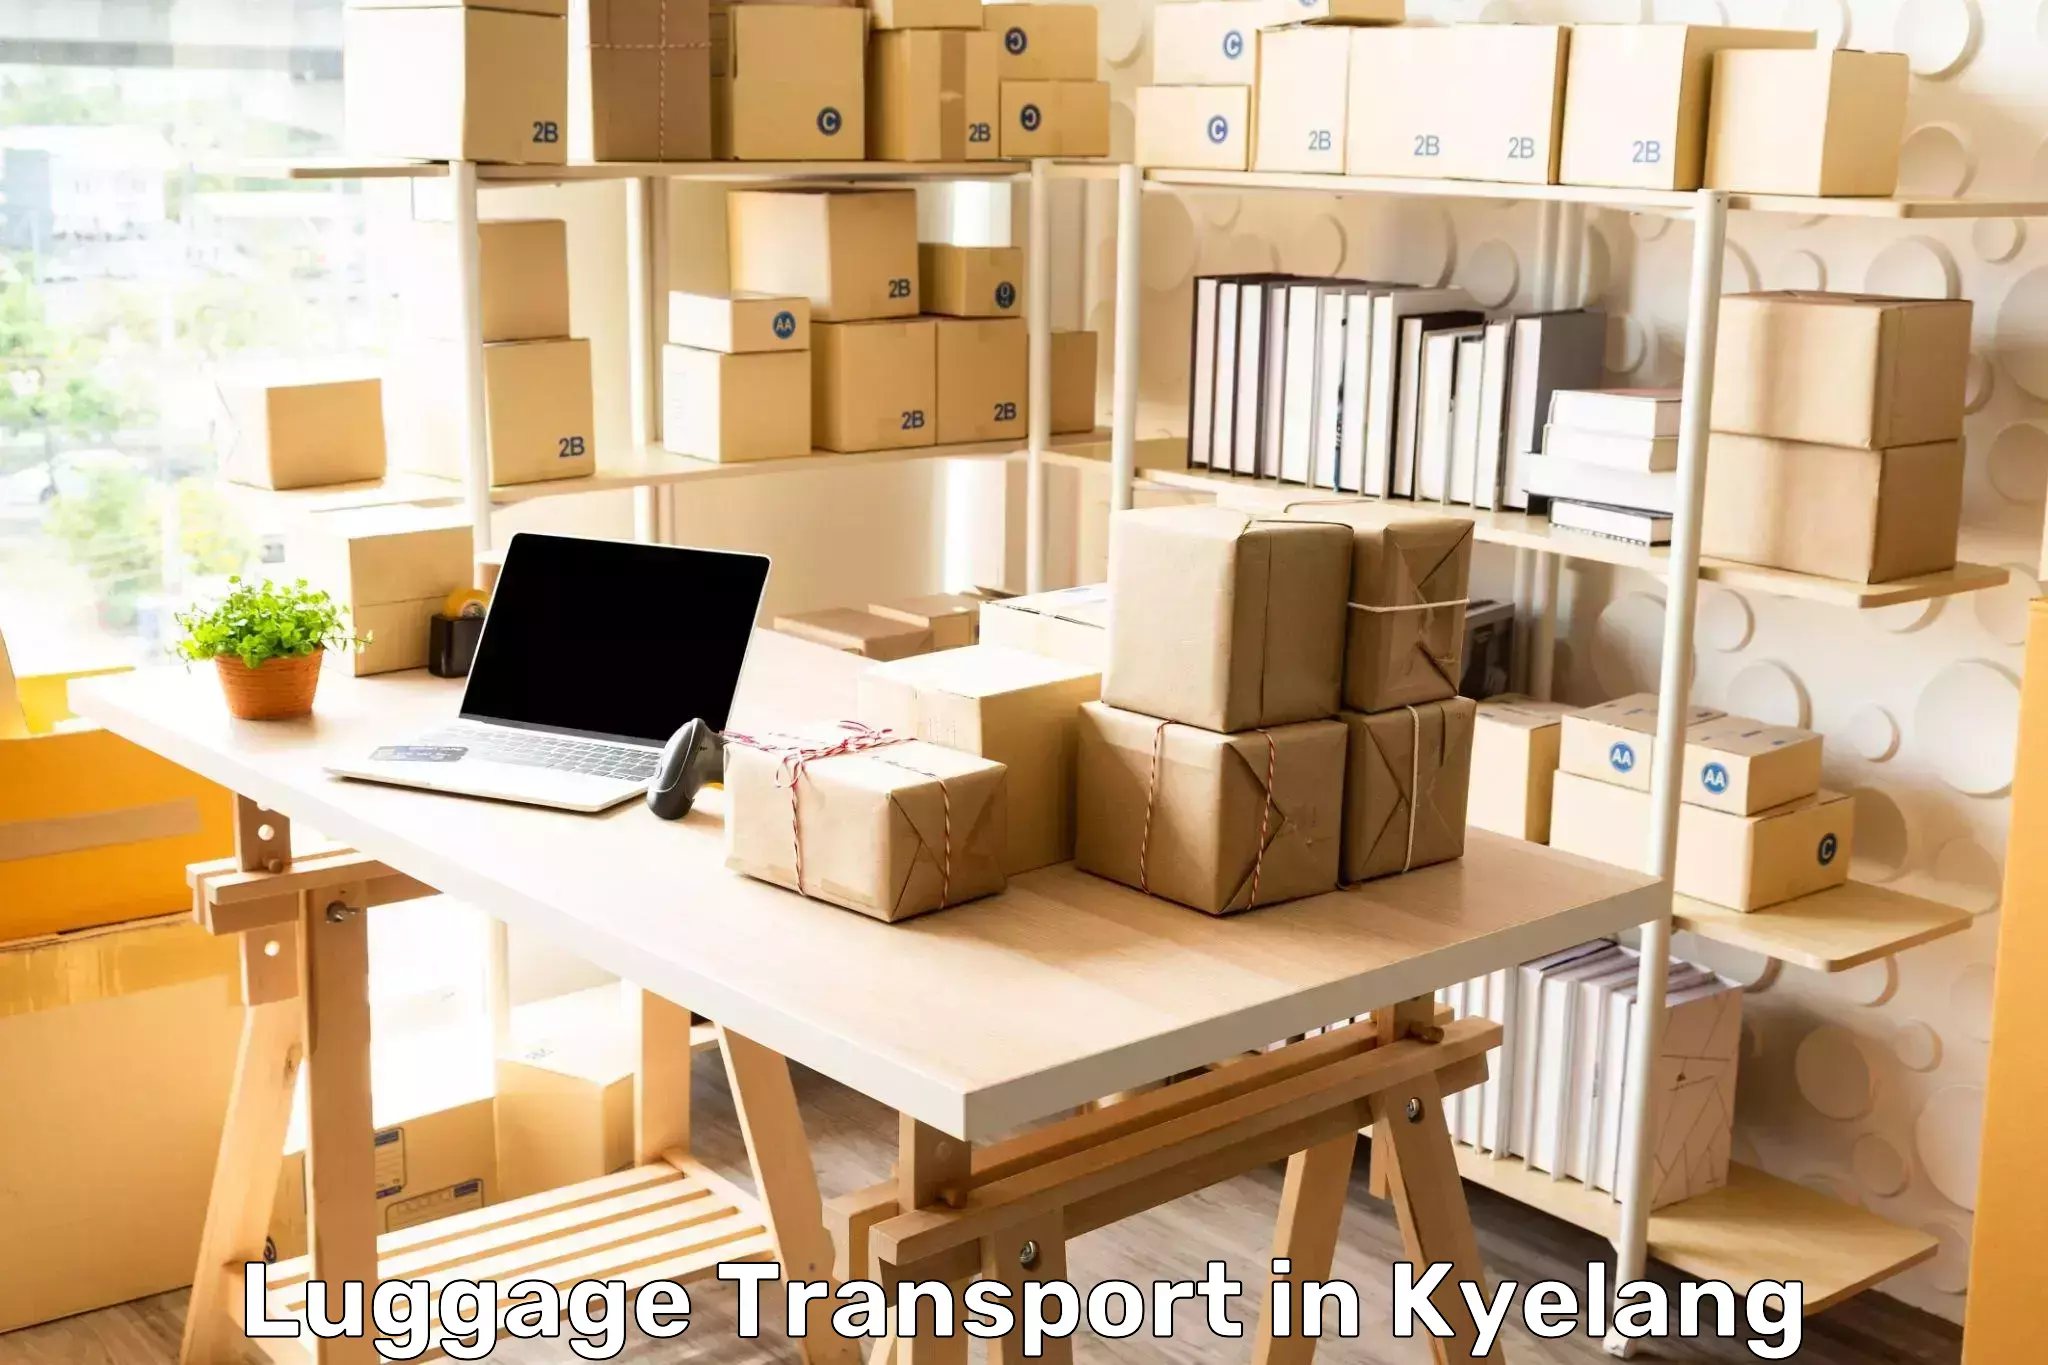 Luggage transport consulting in Kyelang